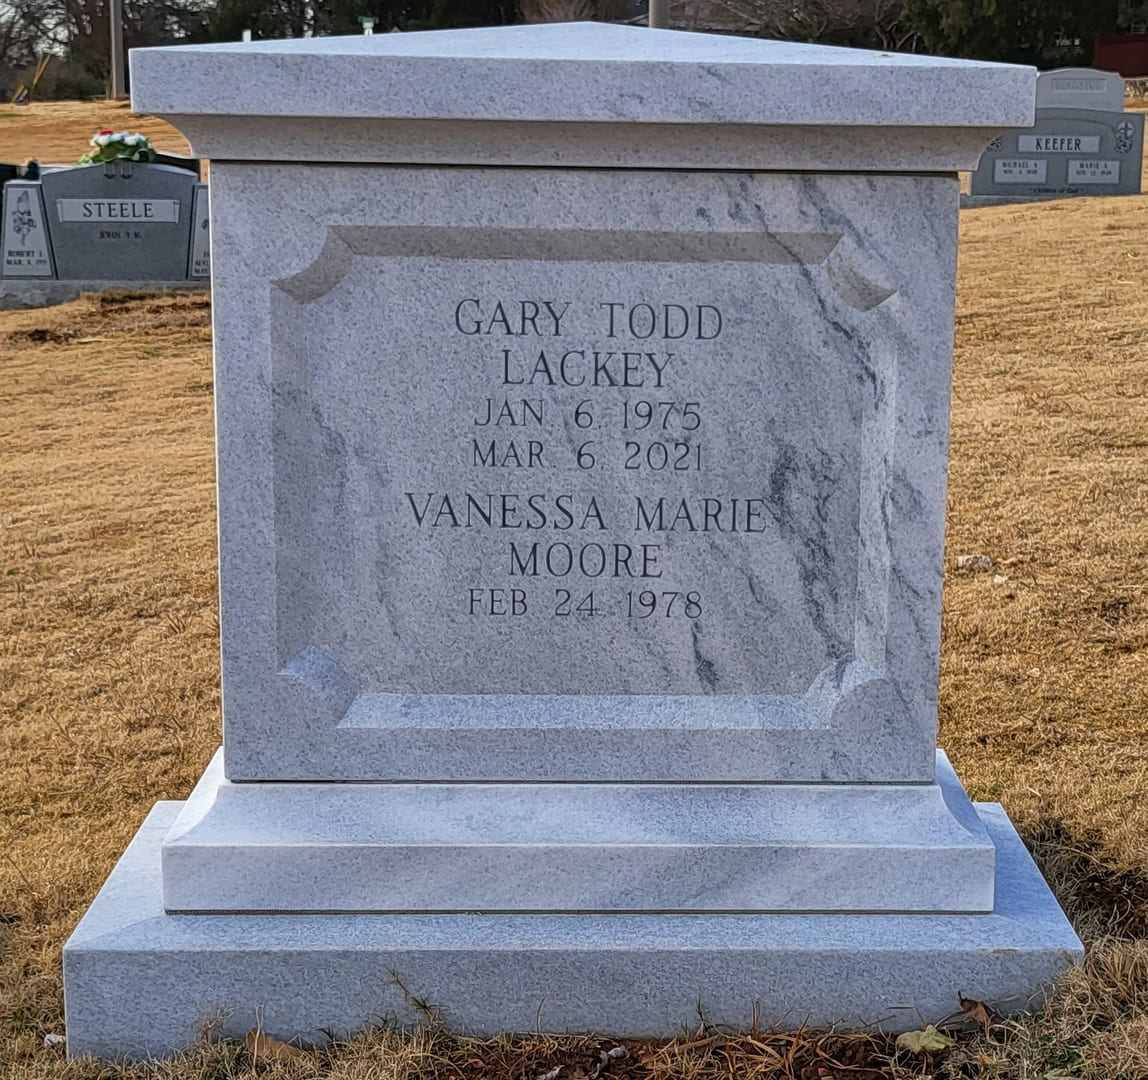 A memorial slab for Gary Todd Lackey and Vanessa Marie Moore